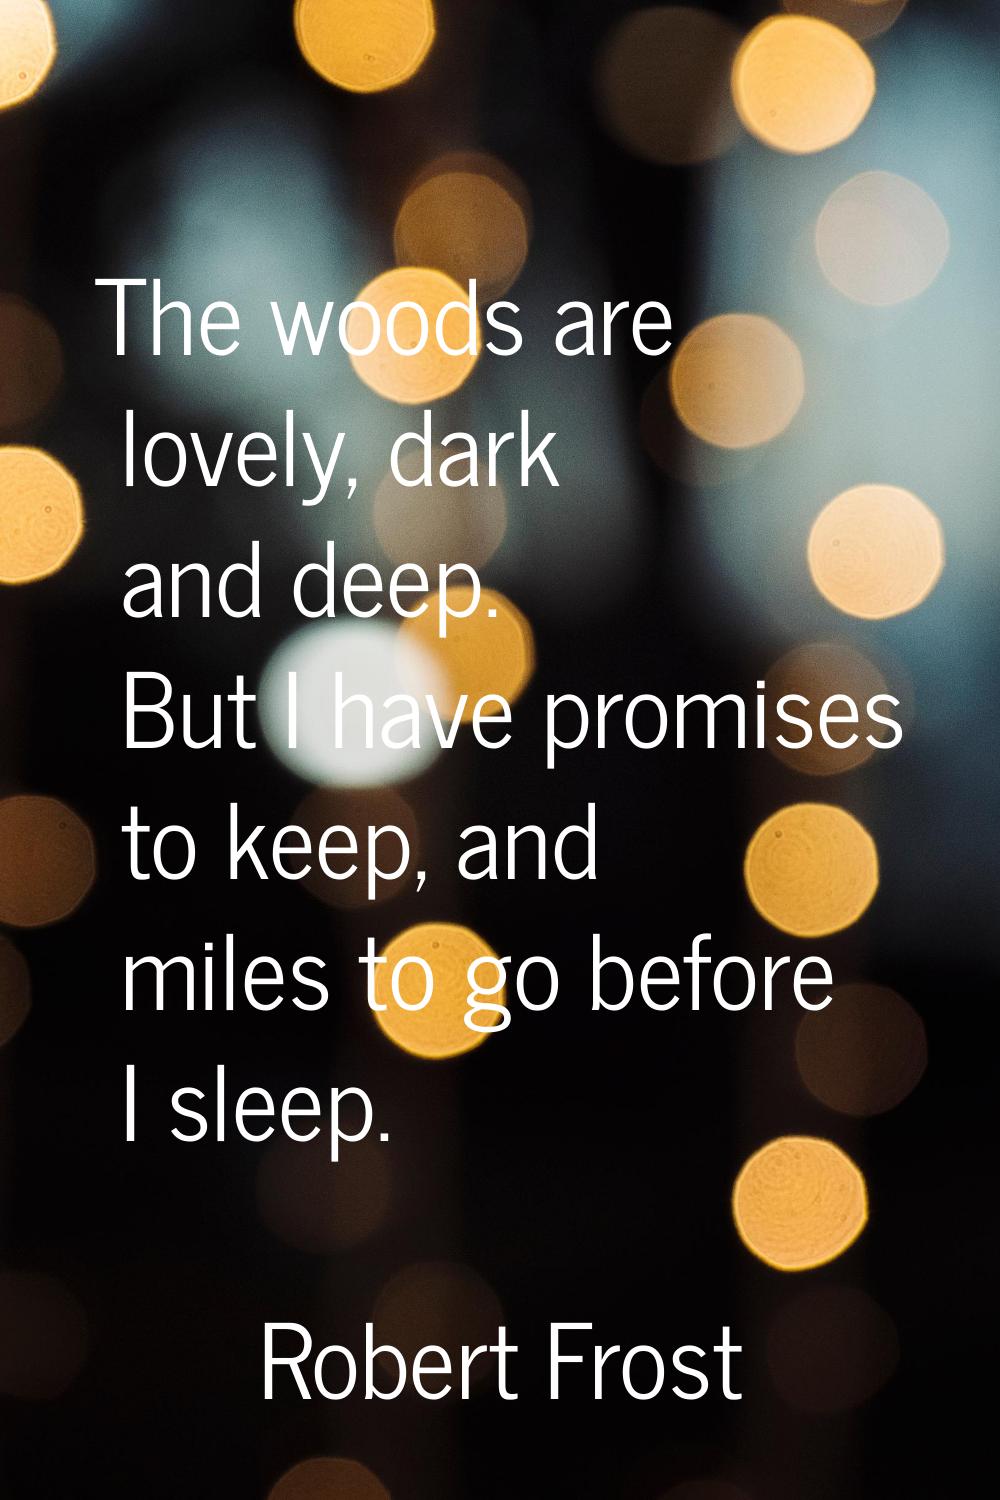 The woods are lovely, dark and deep. But I have promises to keep, and miles to go before I sleep.